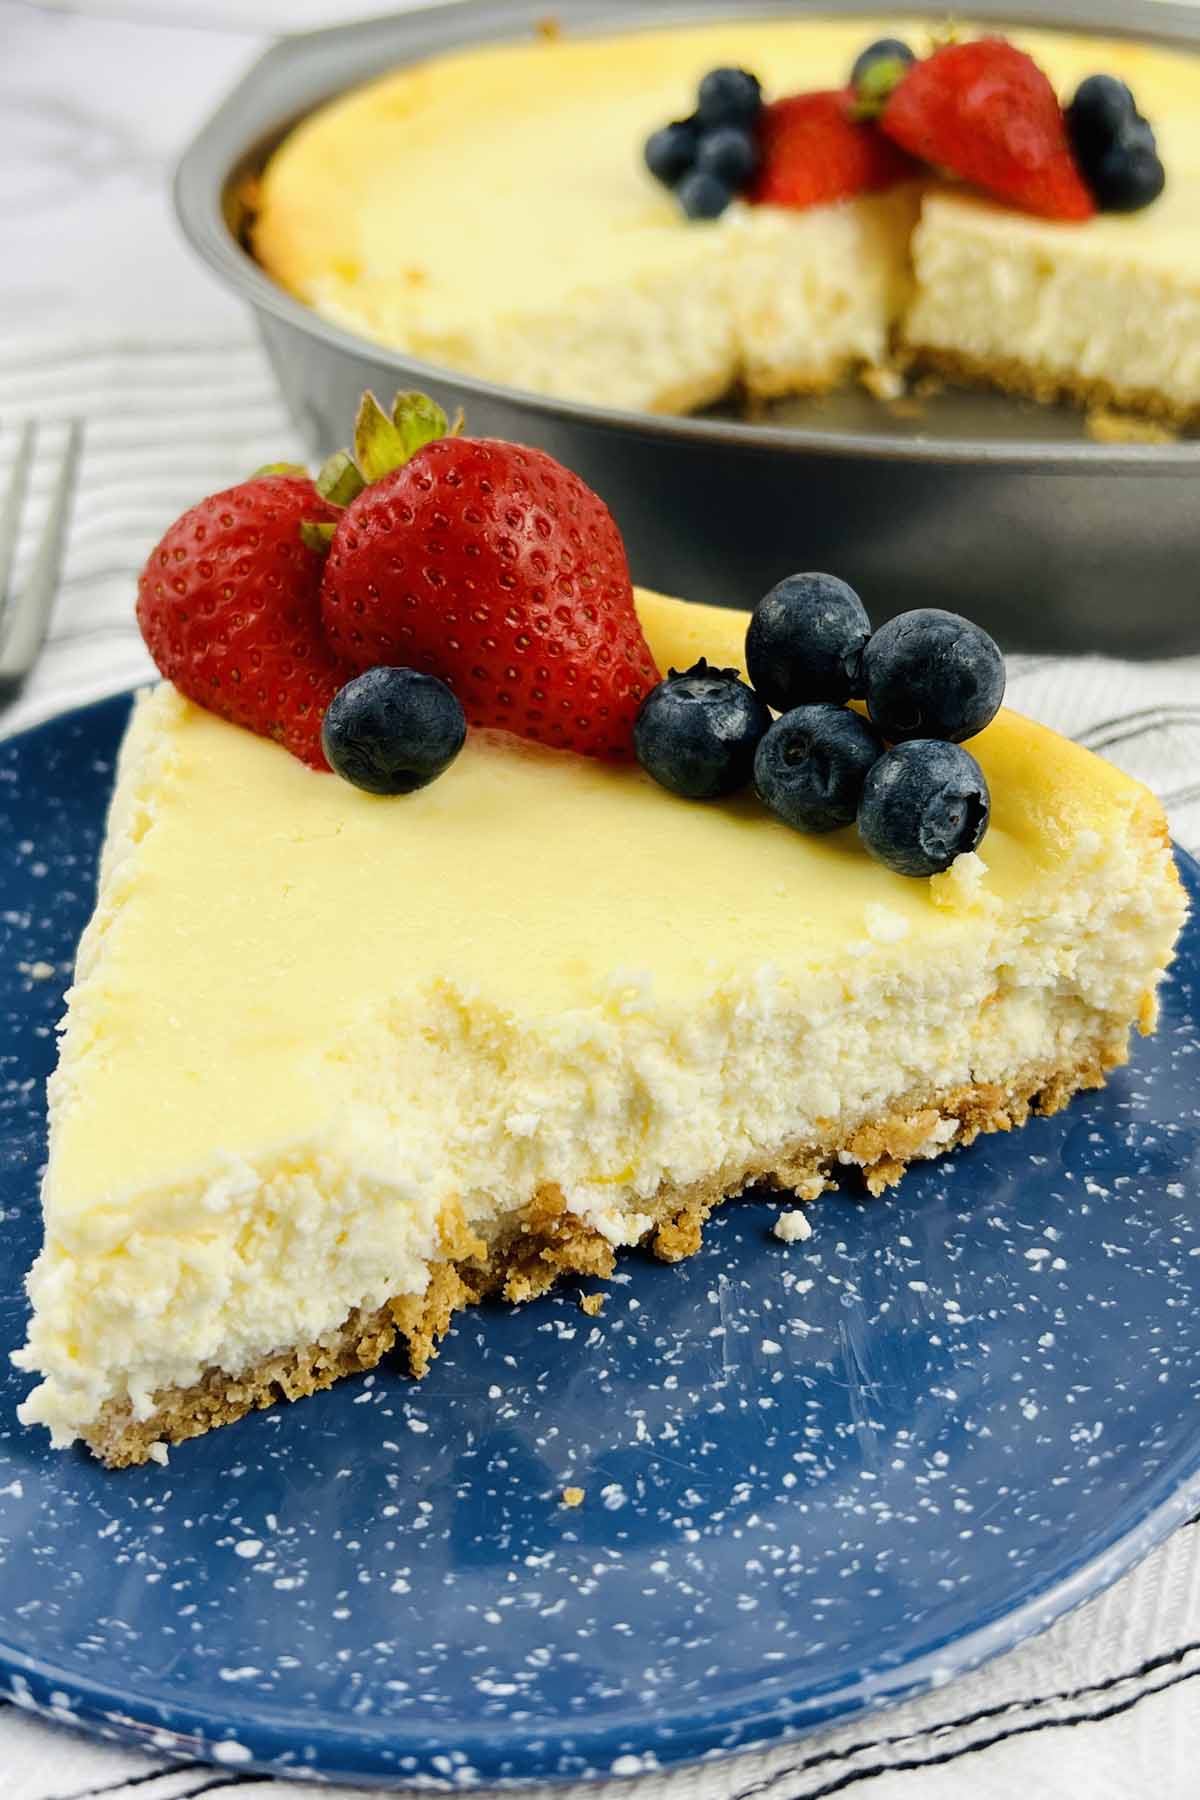 A slice of cheesecake topped with berries.